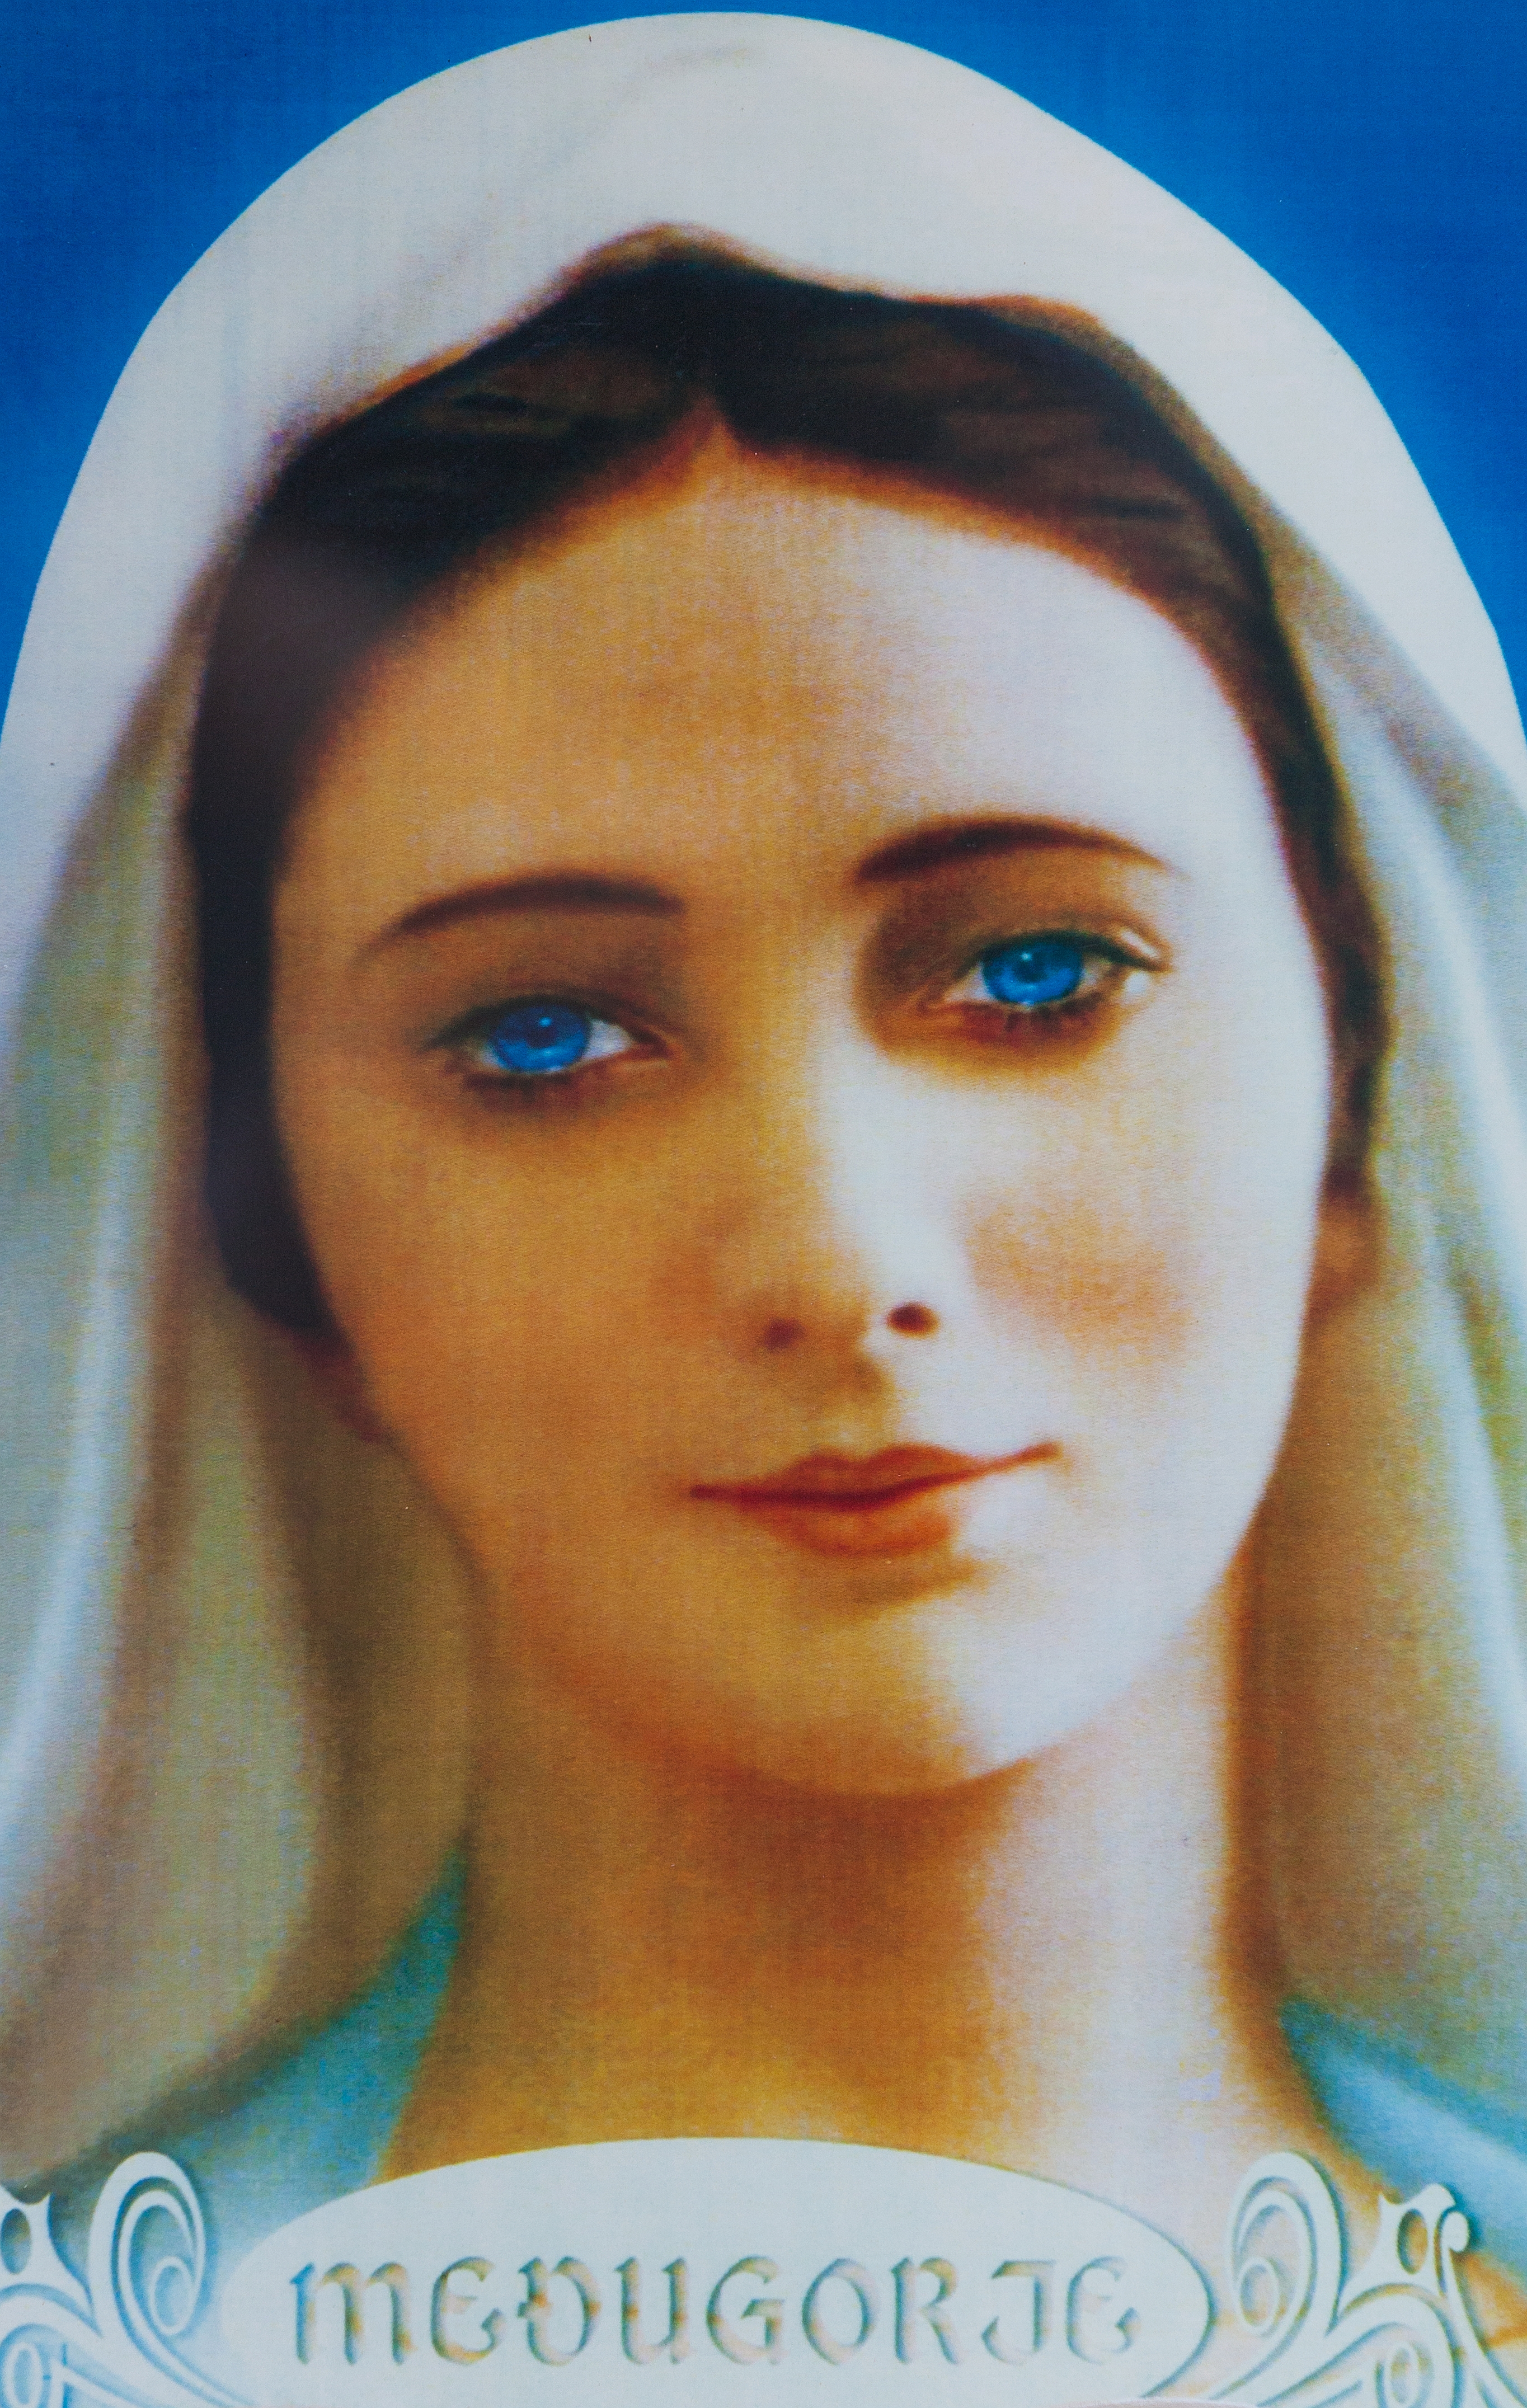 Virgin Mary image in Medjugorje, Bosnia, July 2014, picture 4